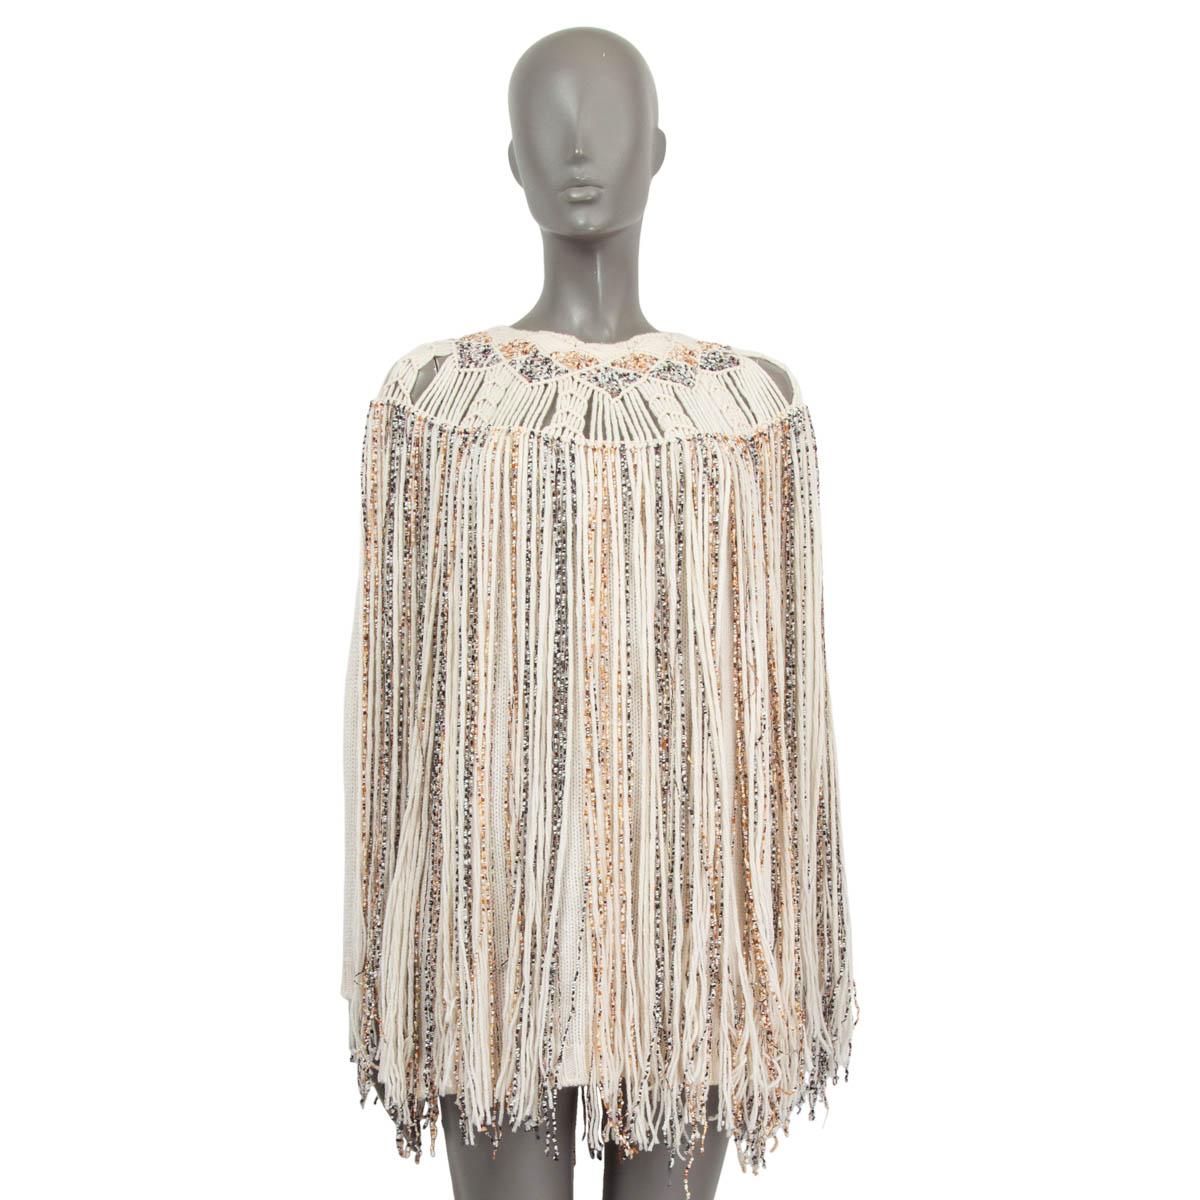 Women's CHRISTIAN DIOR off-white cashmere 2018 FRINGED KNIT Dress 38 S